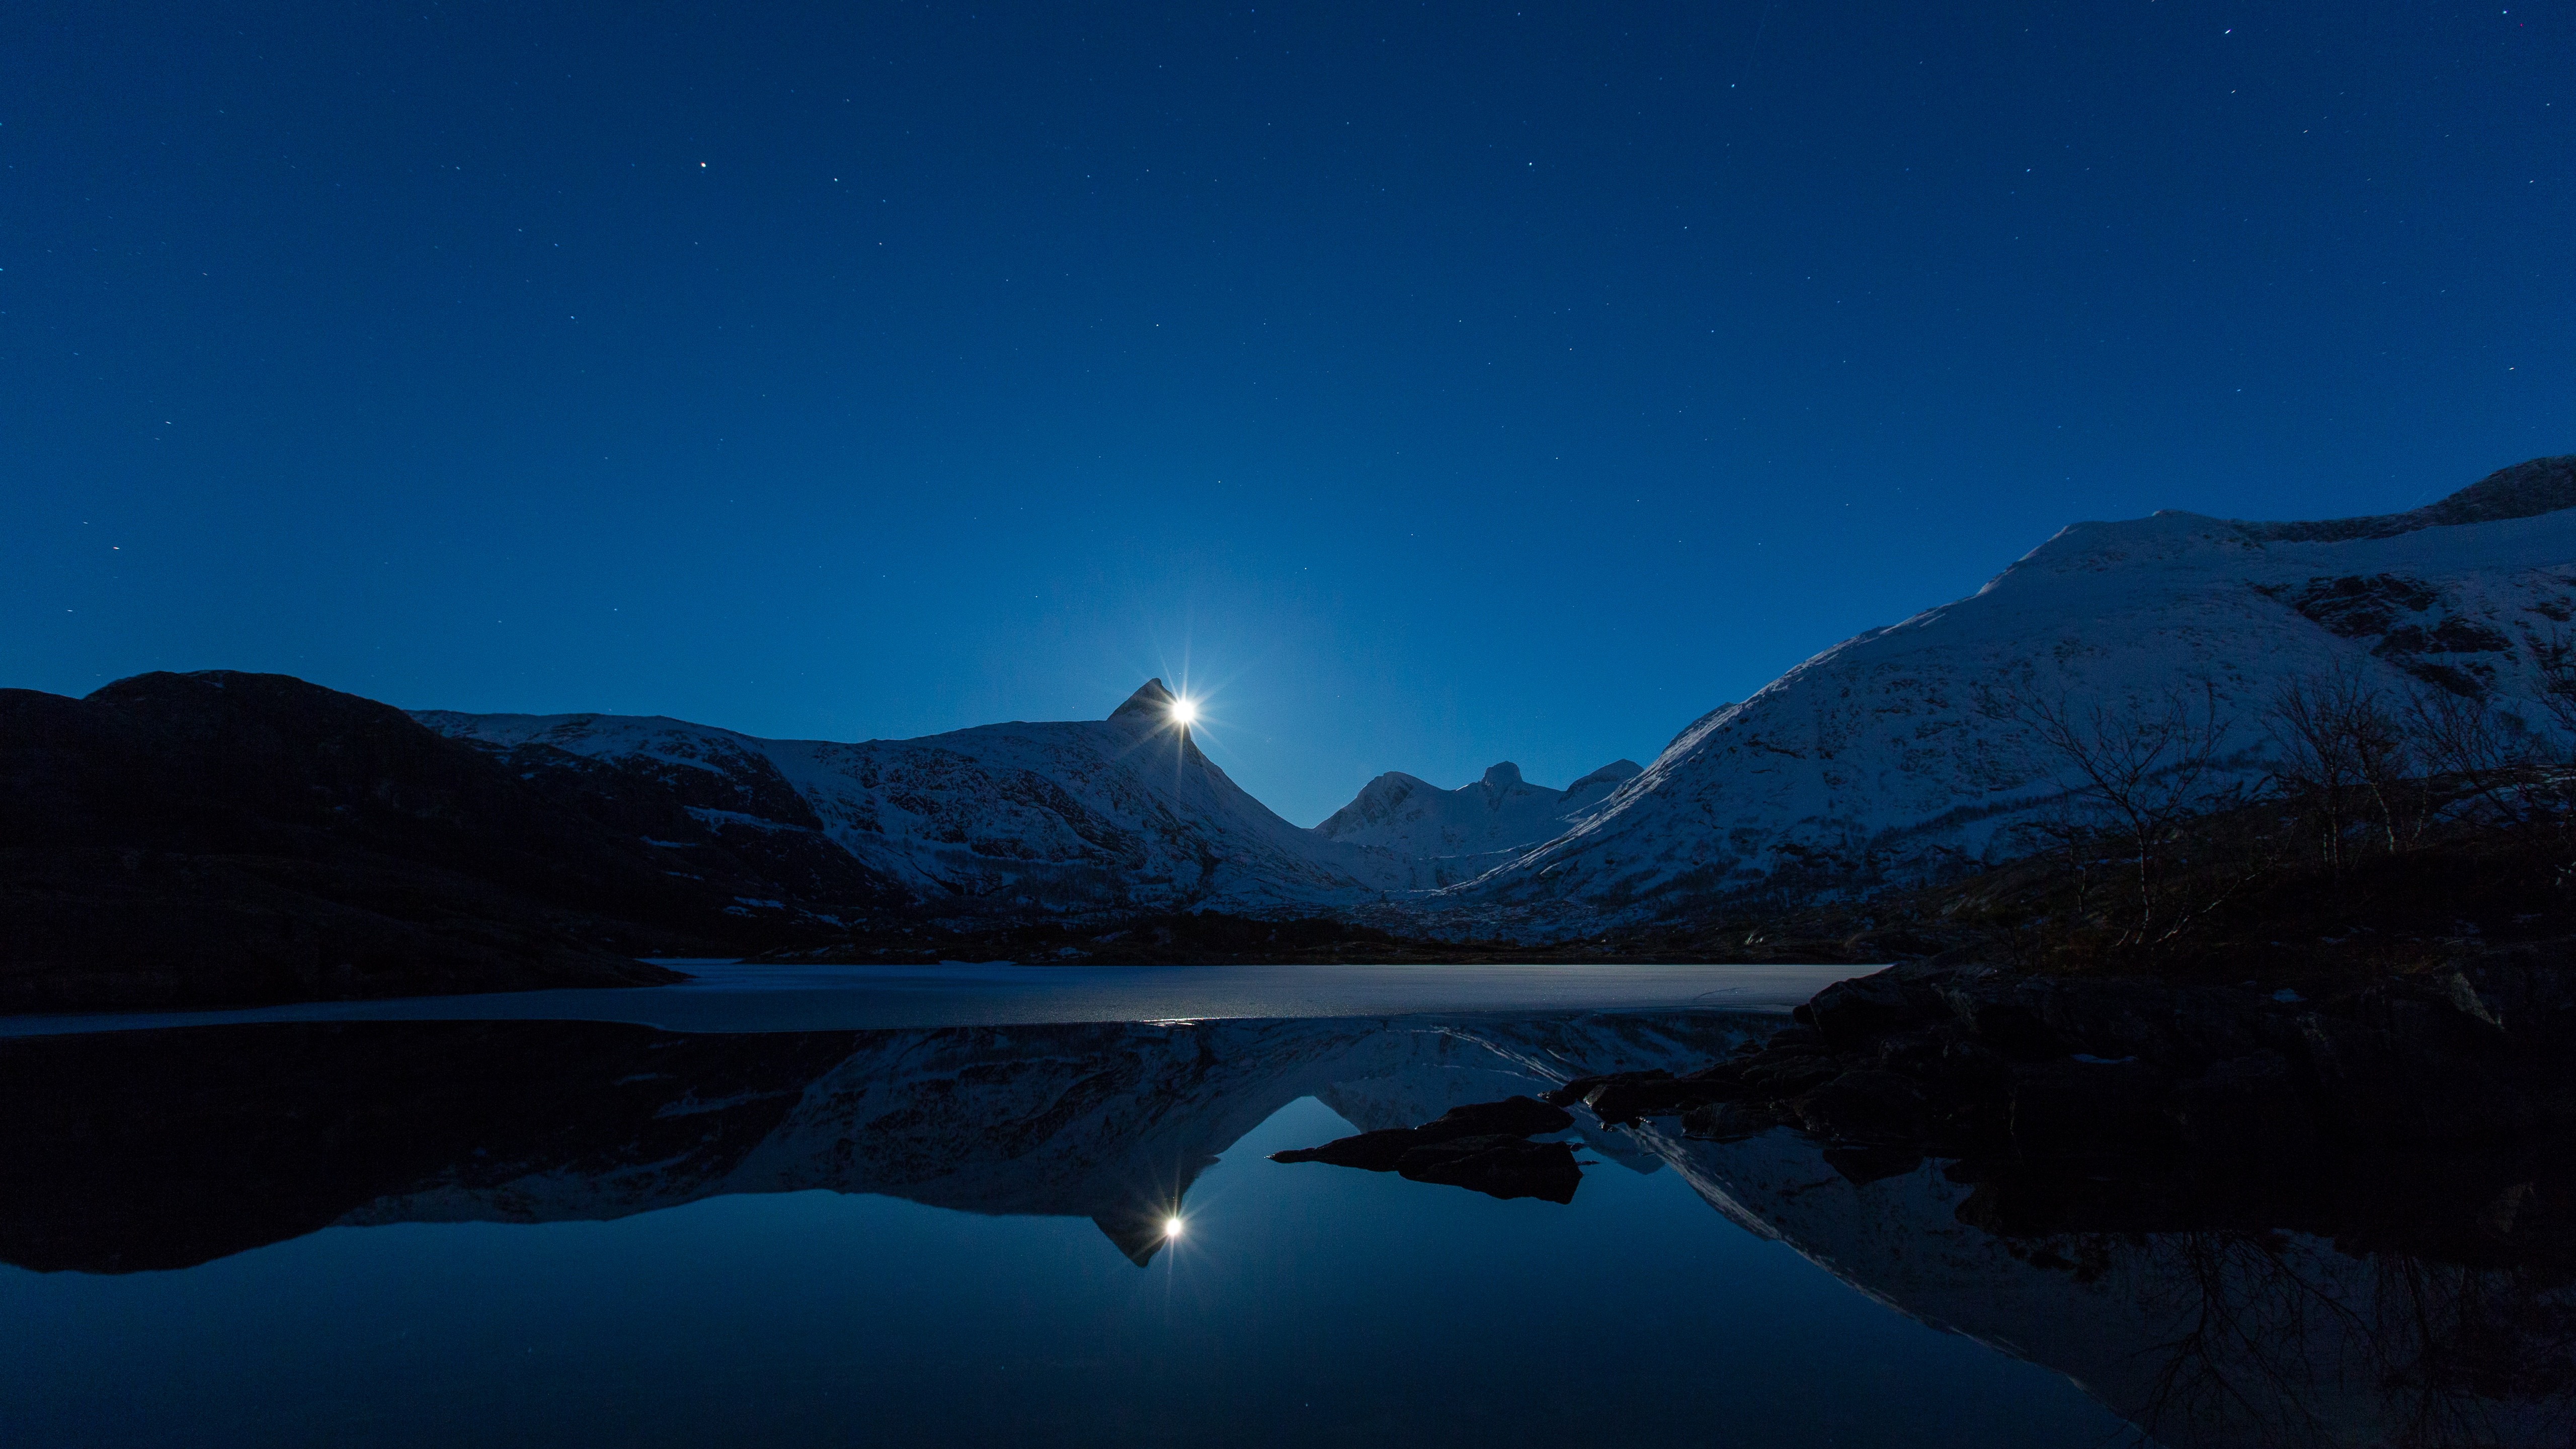 General 5120x2880 Norway snow landscape nordic landscapes dark ice cold reflection mountains snowy peak snowy mountain